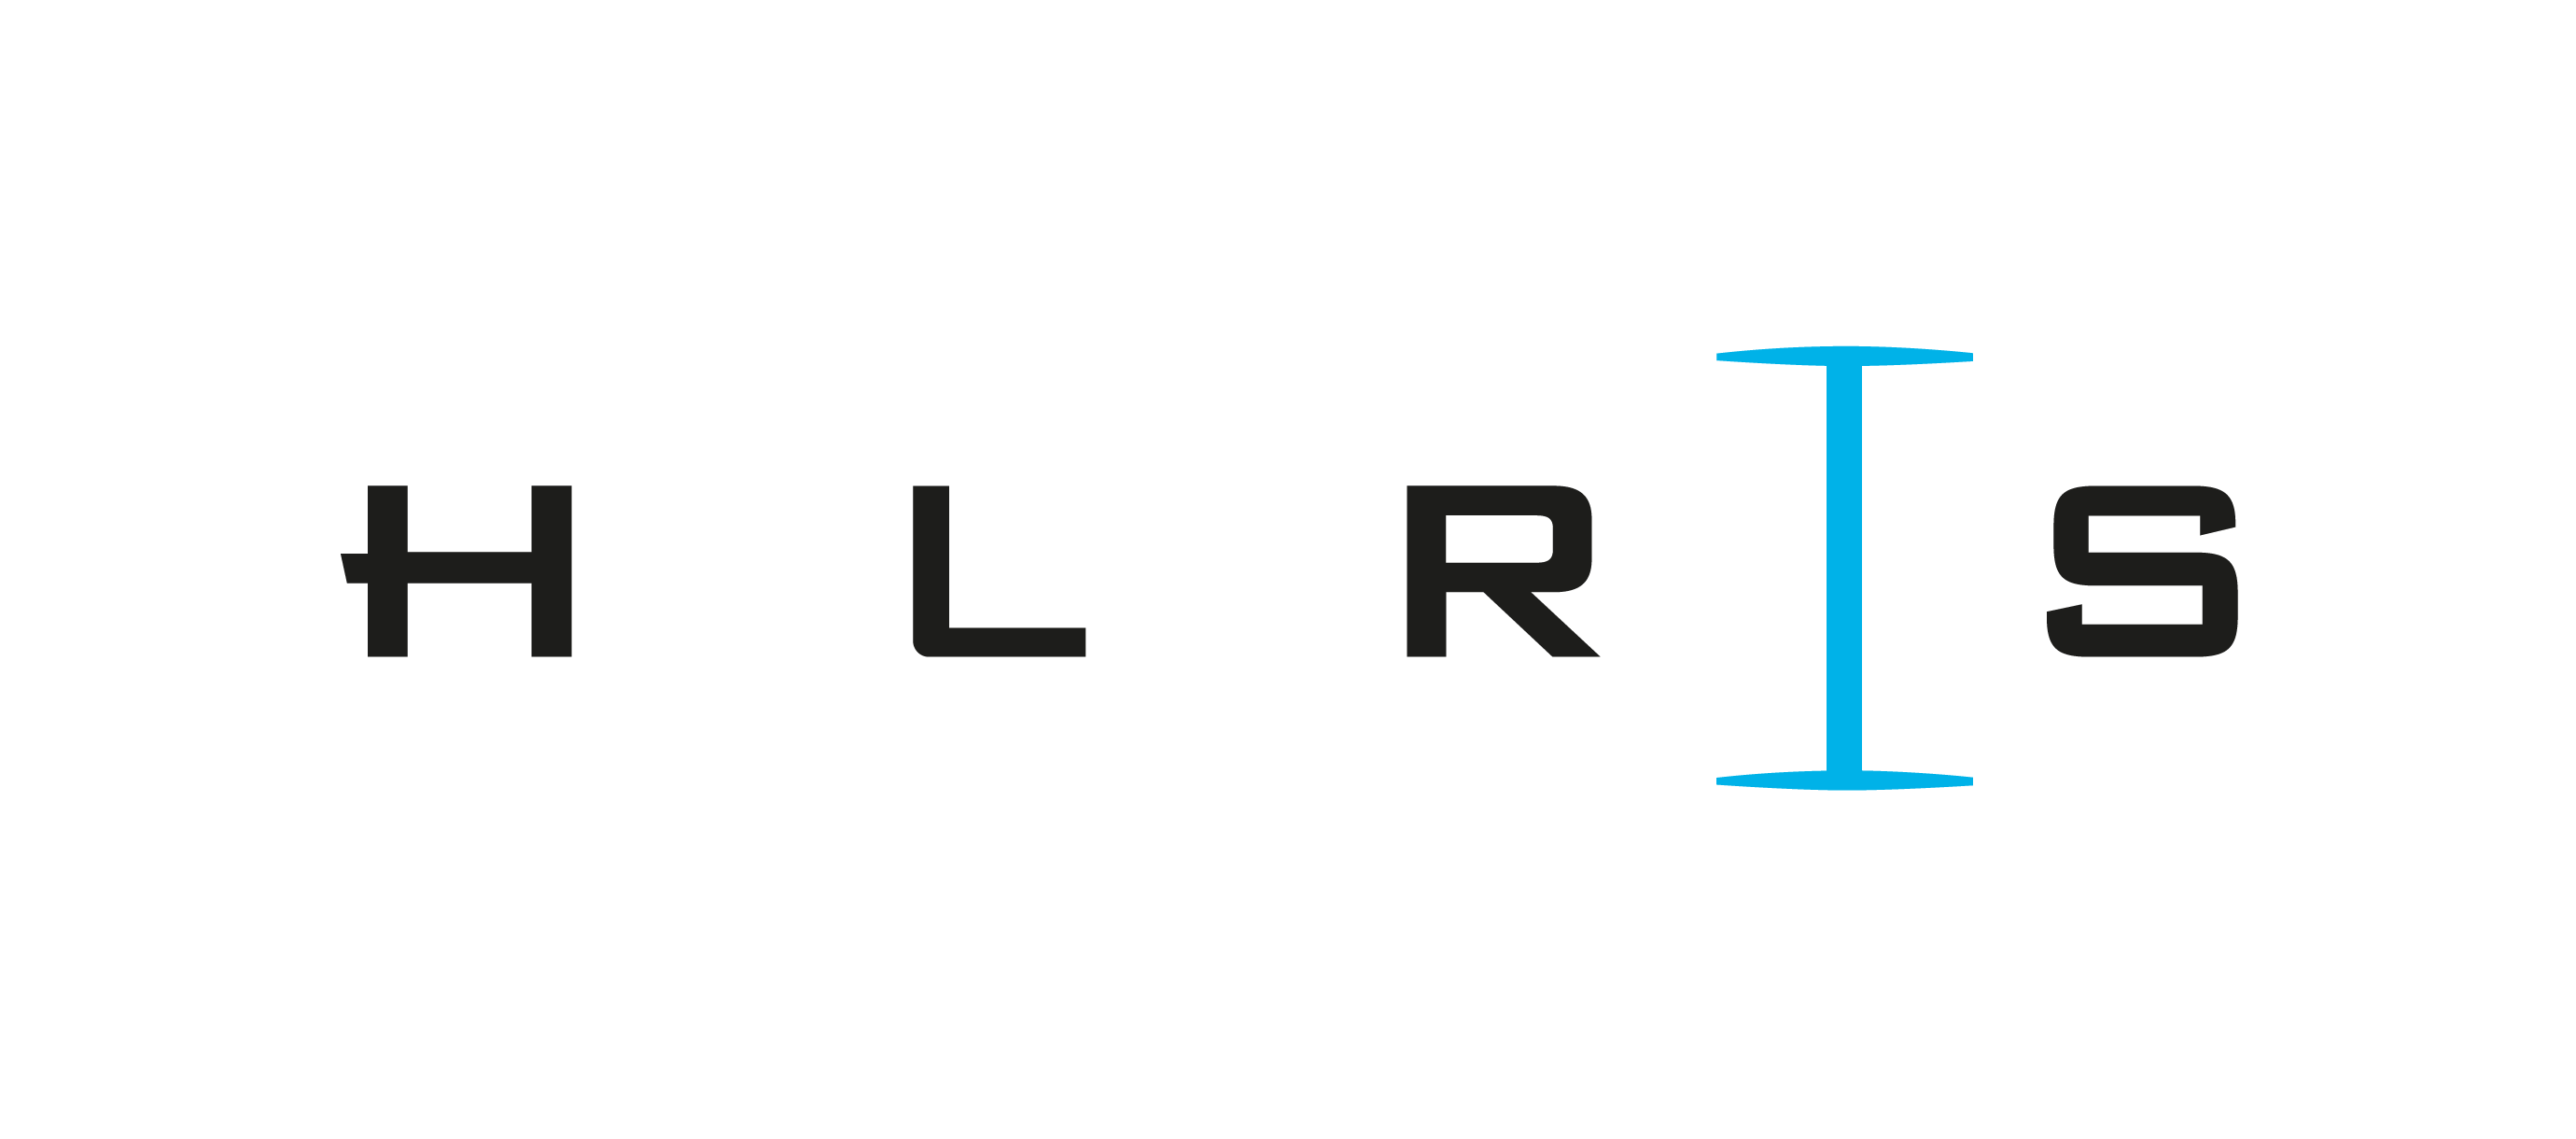 Letters HLRS in blac with a blue computer cursor between the R and the S.